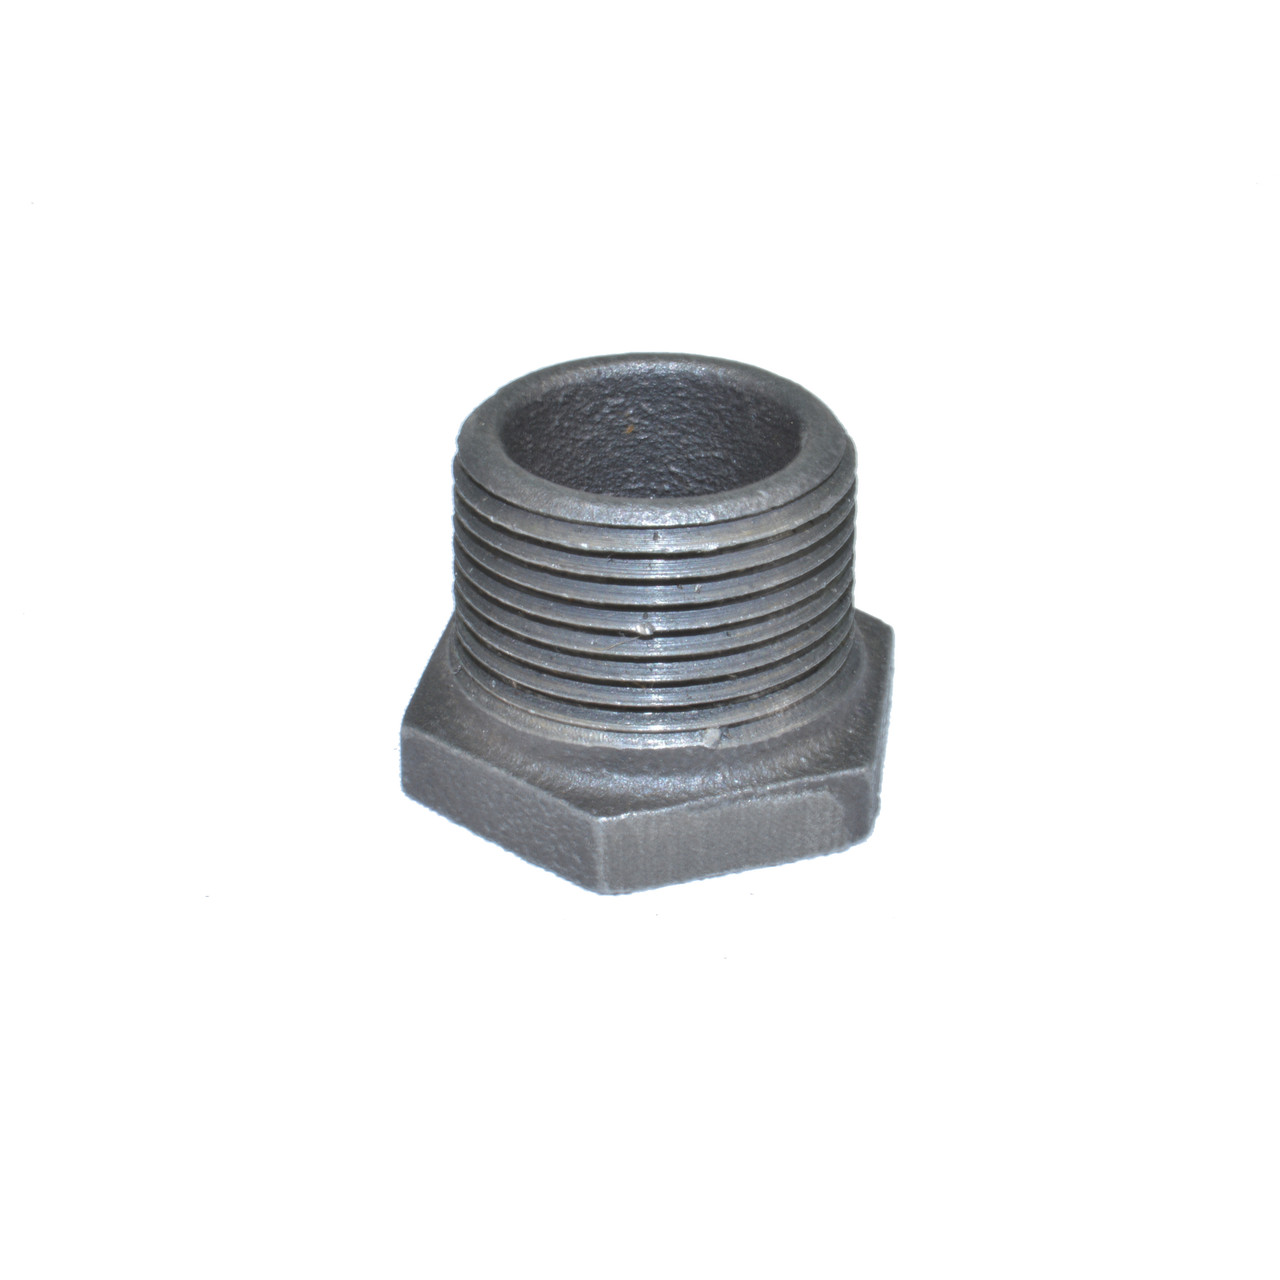 bushing, 1"x3/4" used on the R028001 Ford exhaust manifold.